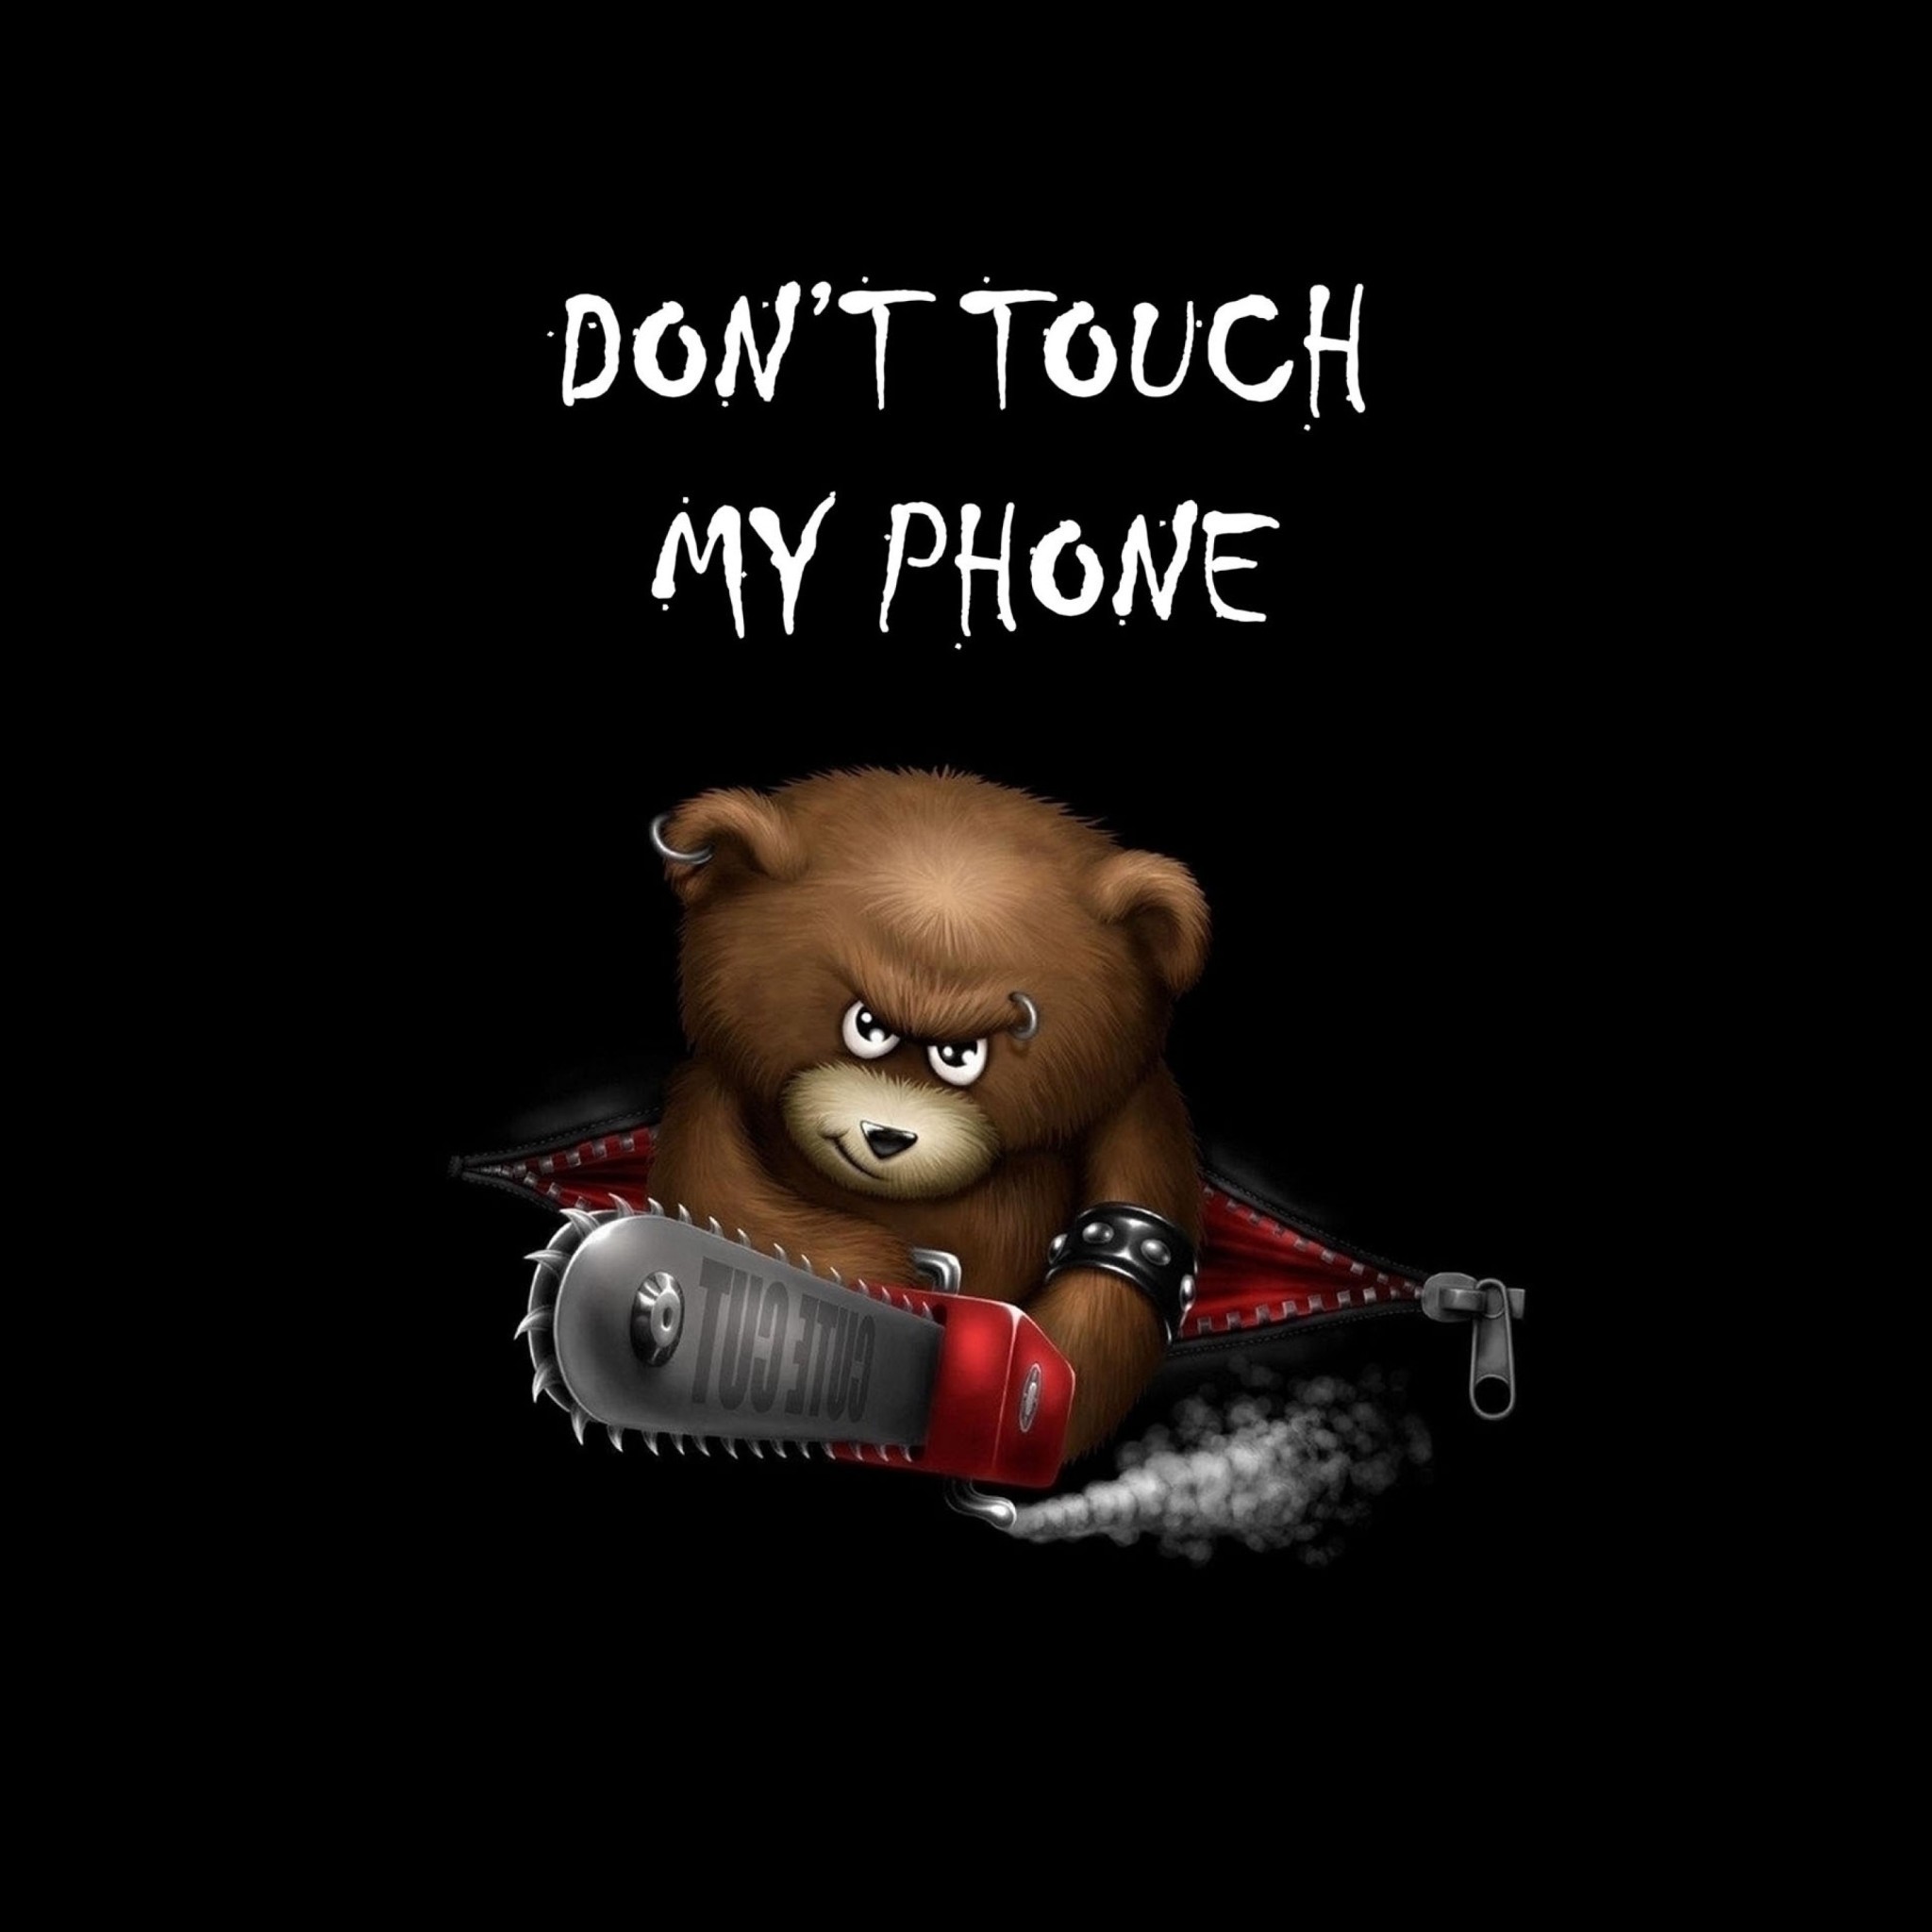 2048x2048 Download Don't Touch My Phone 2048 x 2048 Wallpapers - 4612984 - funny sign  logo | mobile9